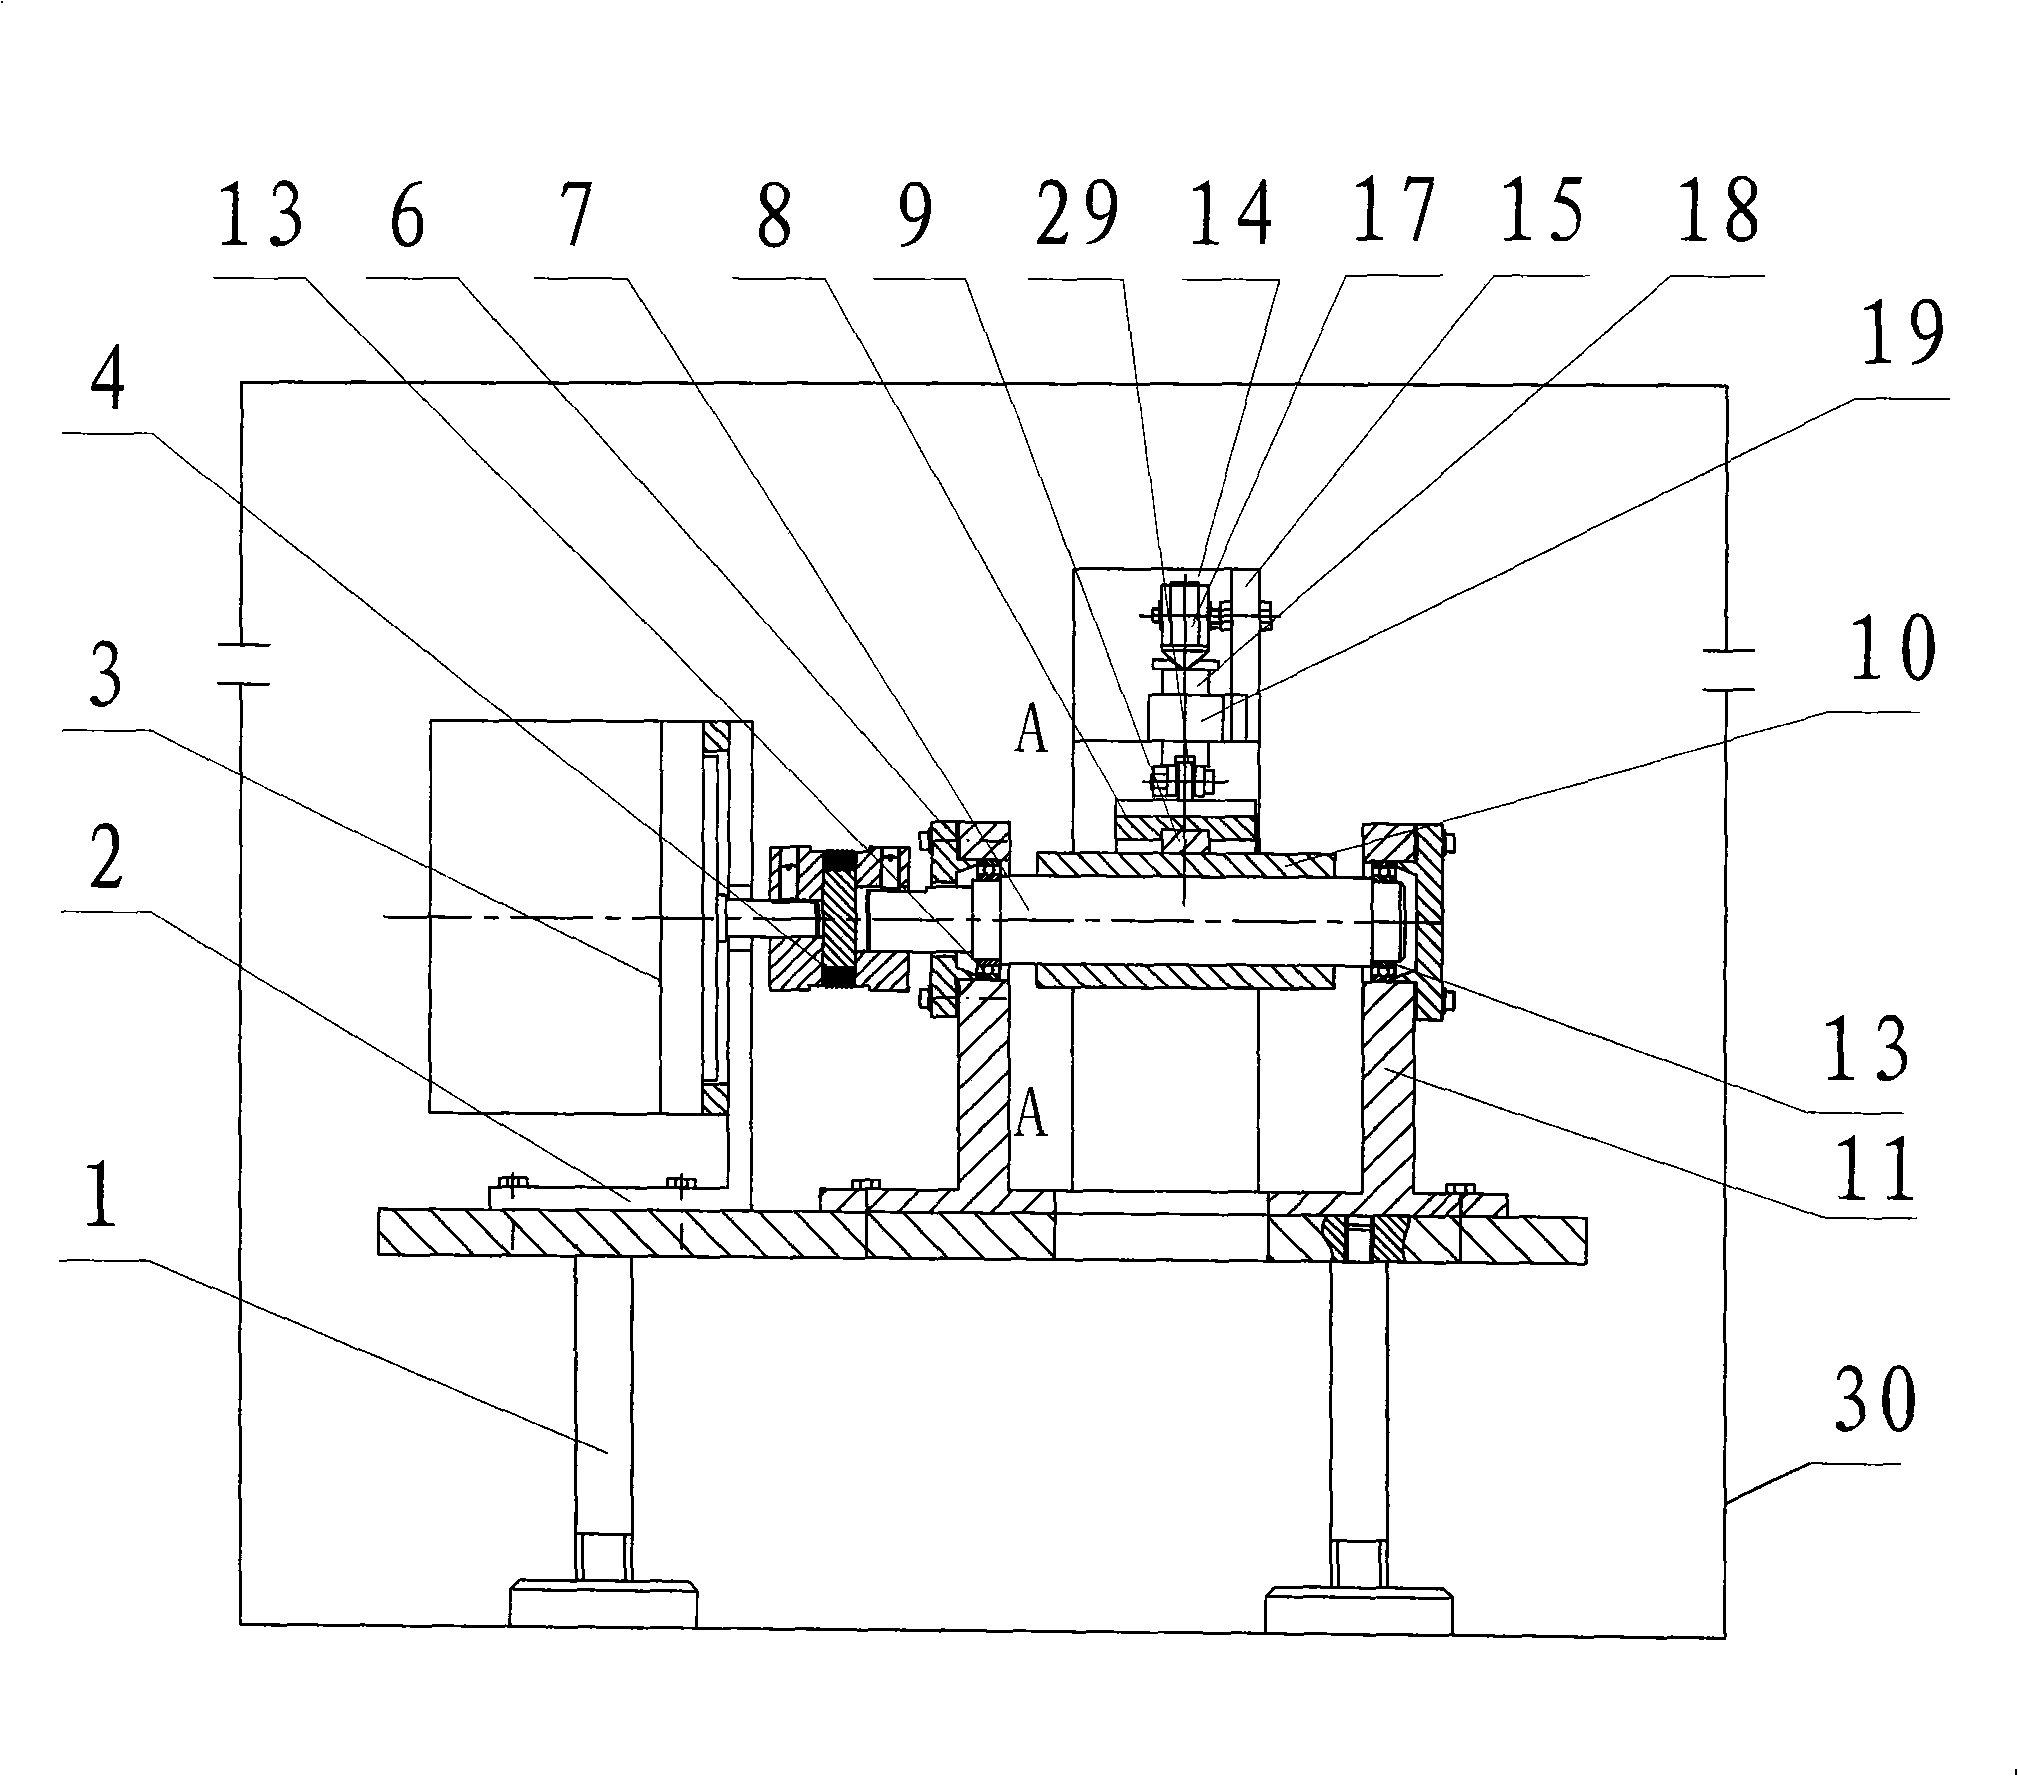 Experimental apparatus for testing sliding friction property of friction materials